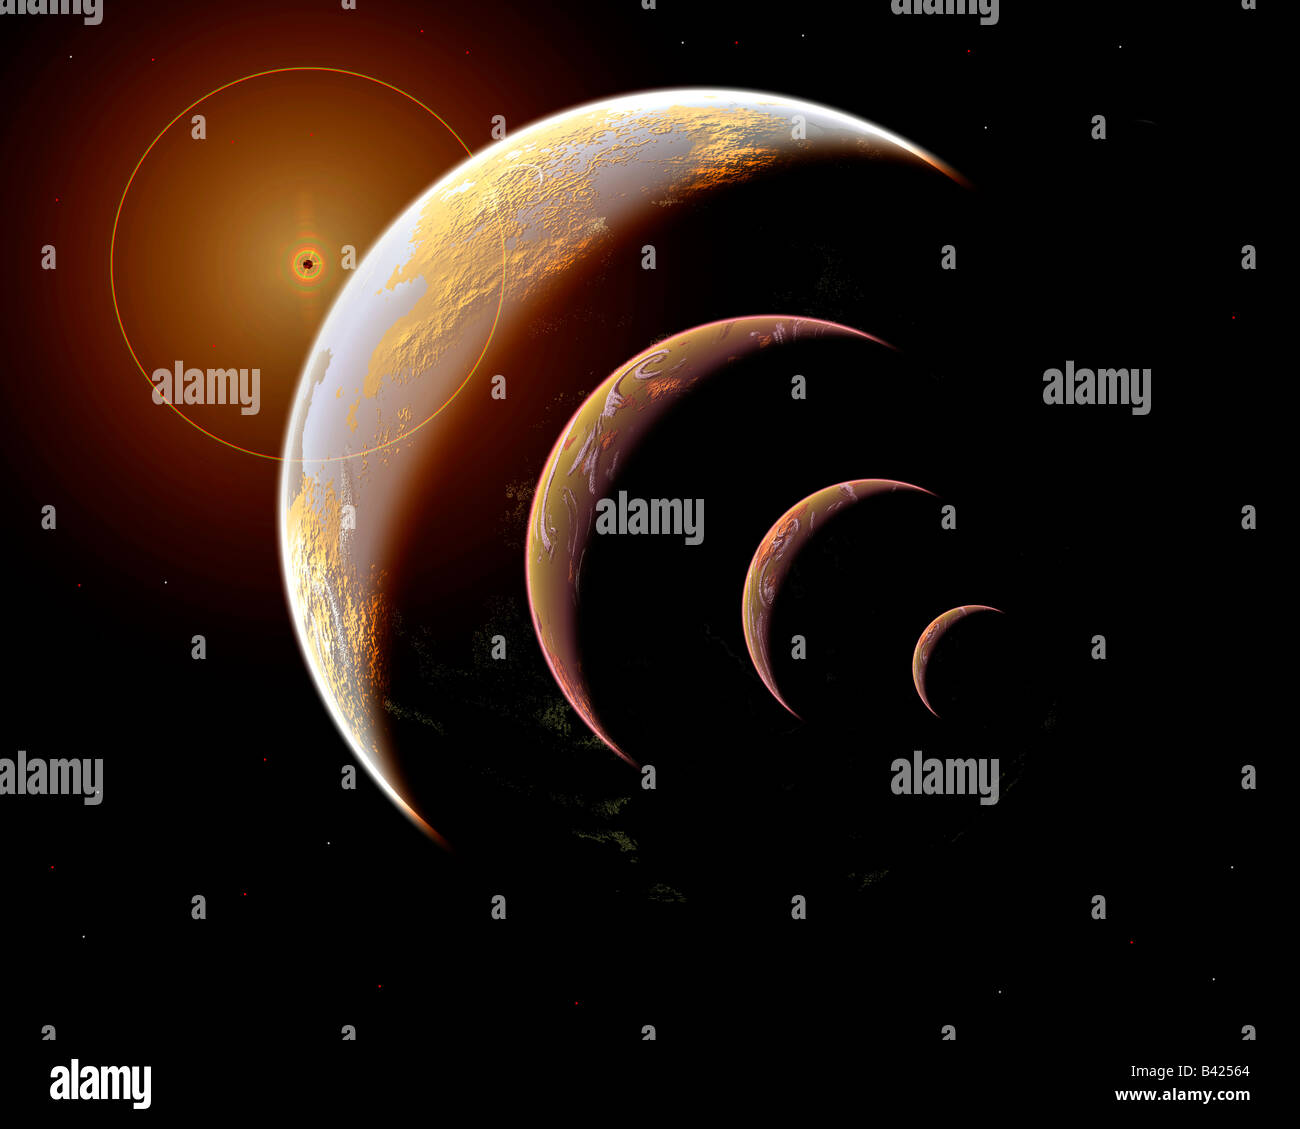 Family Of Planets Stock Photo